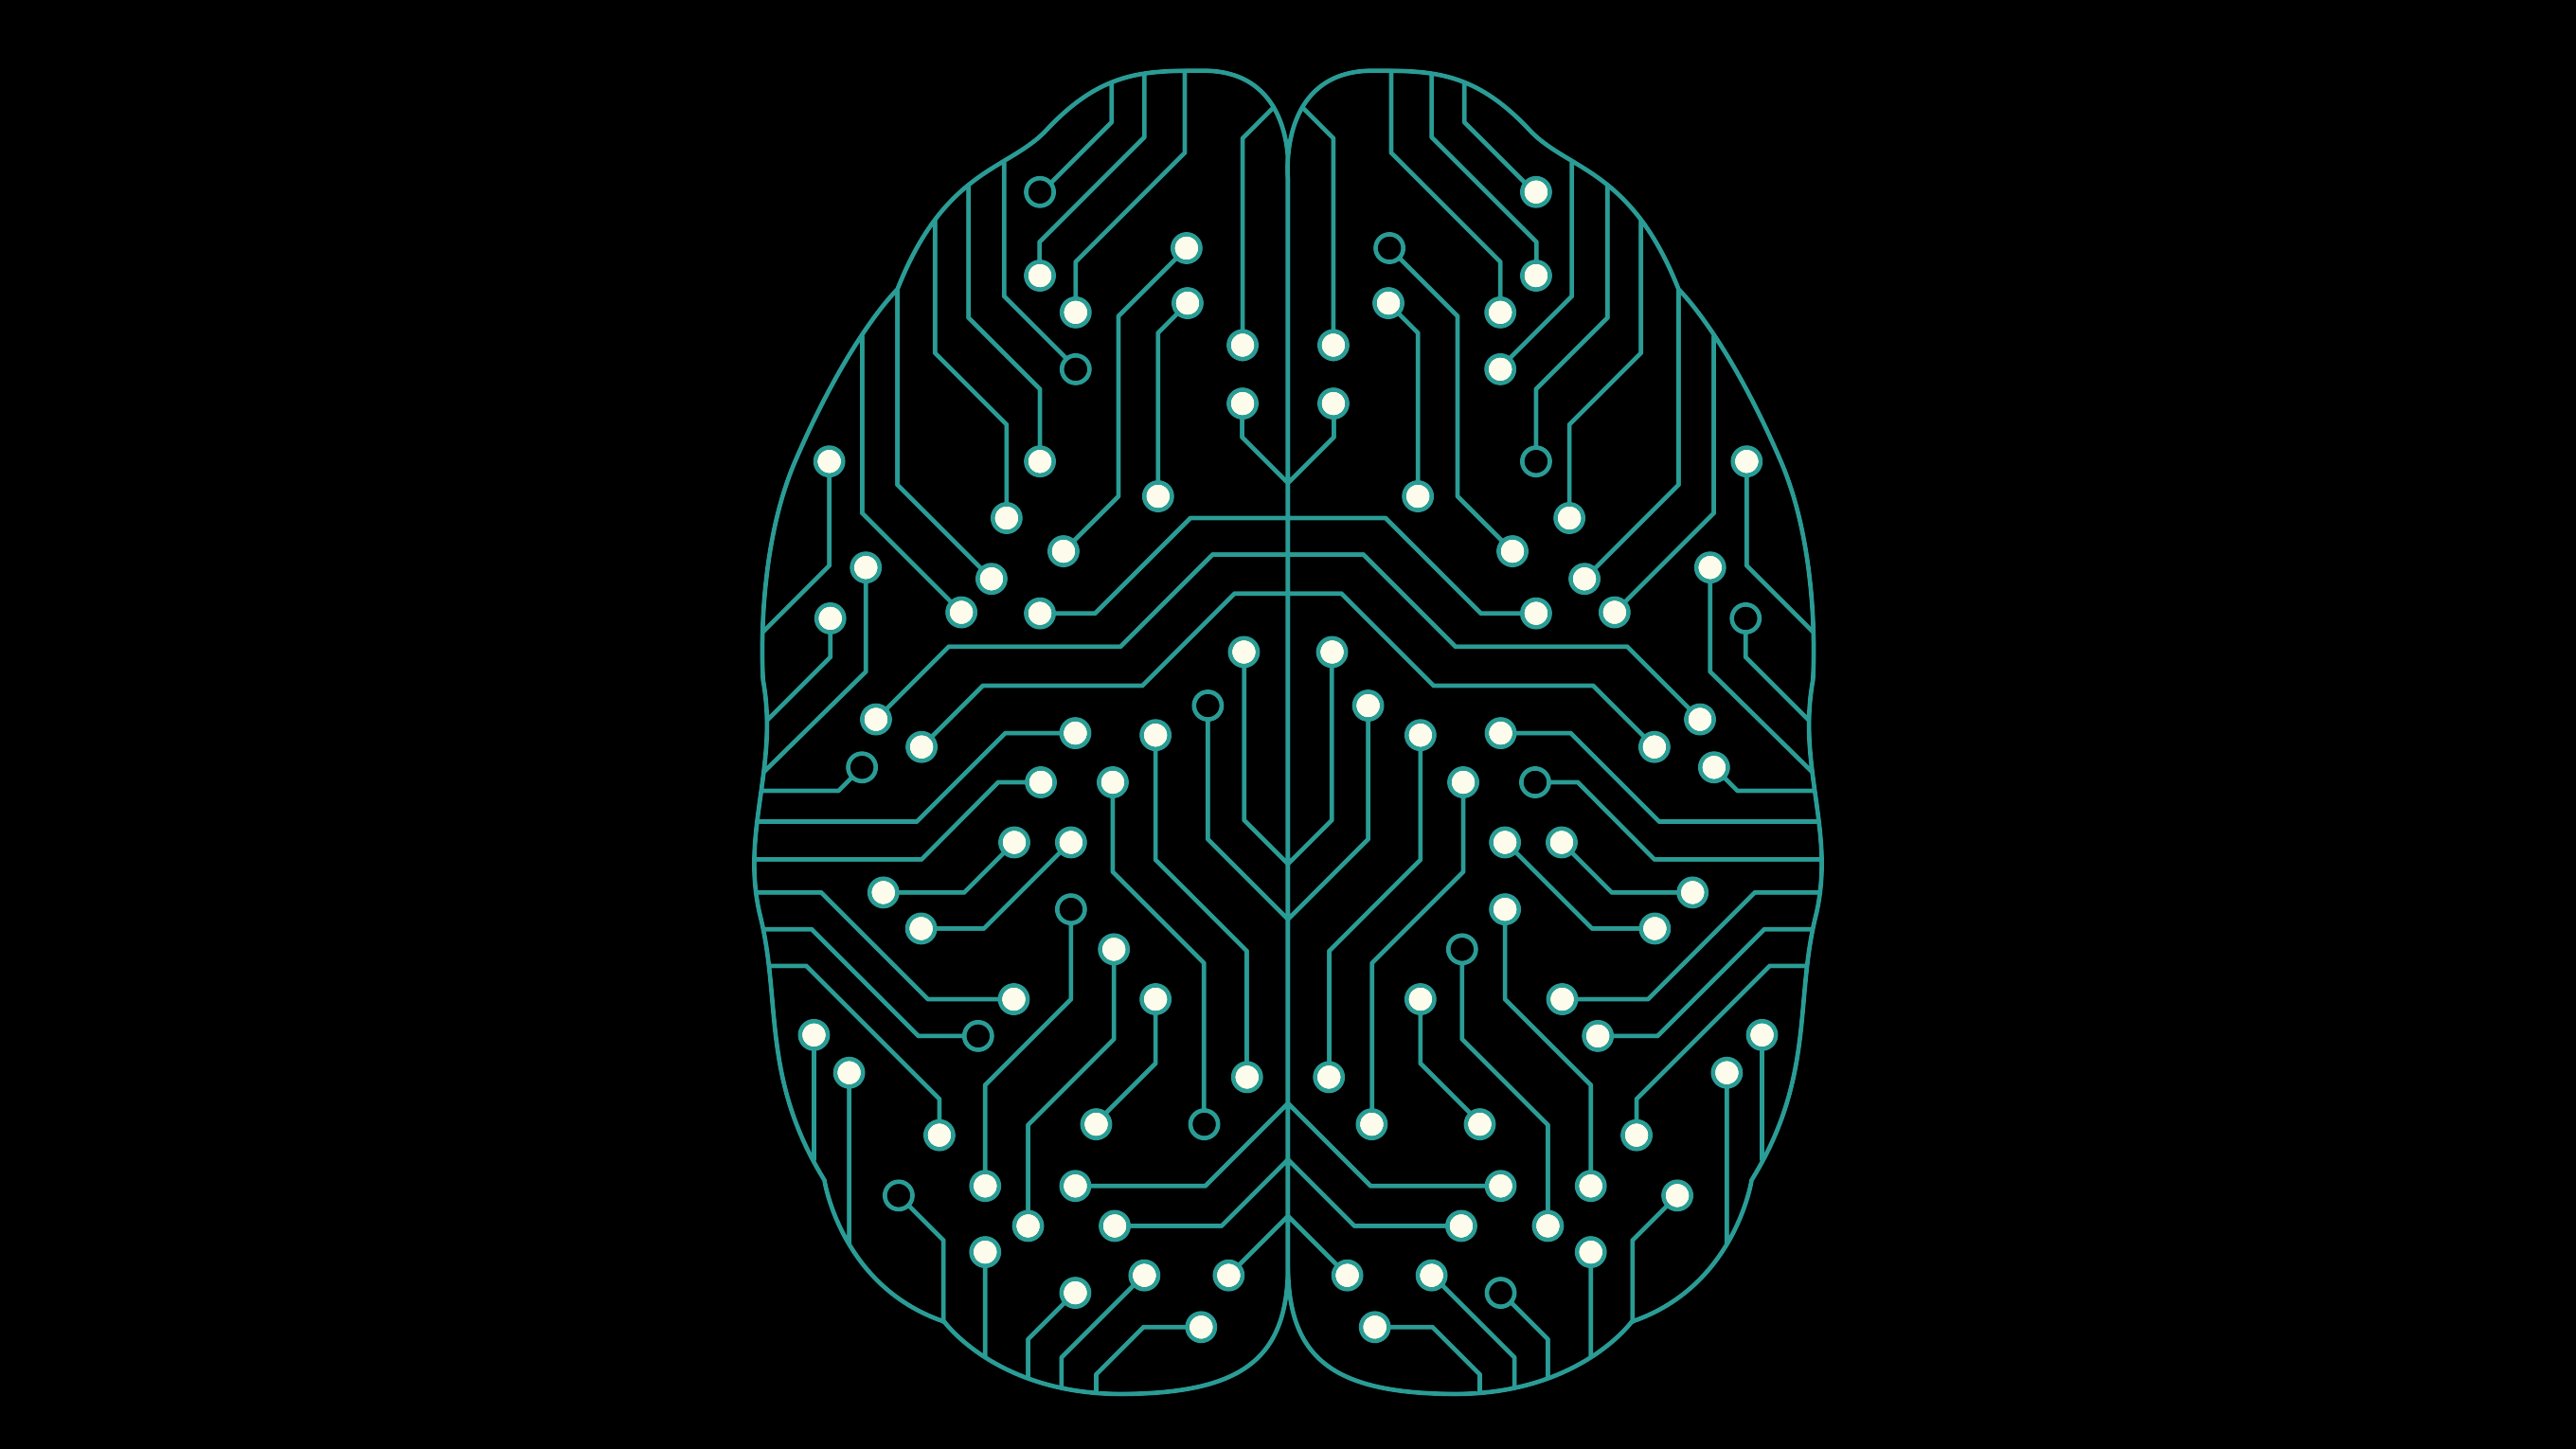 Illustration showing brain opening, revealing data workers